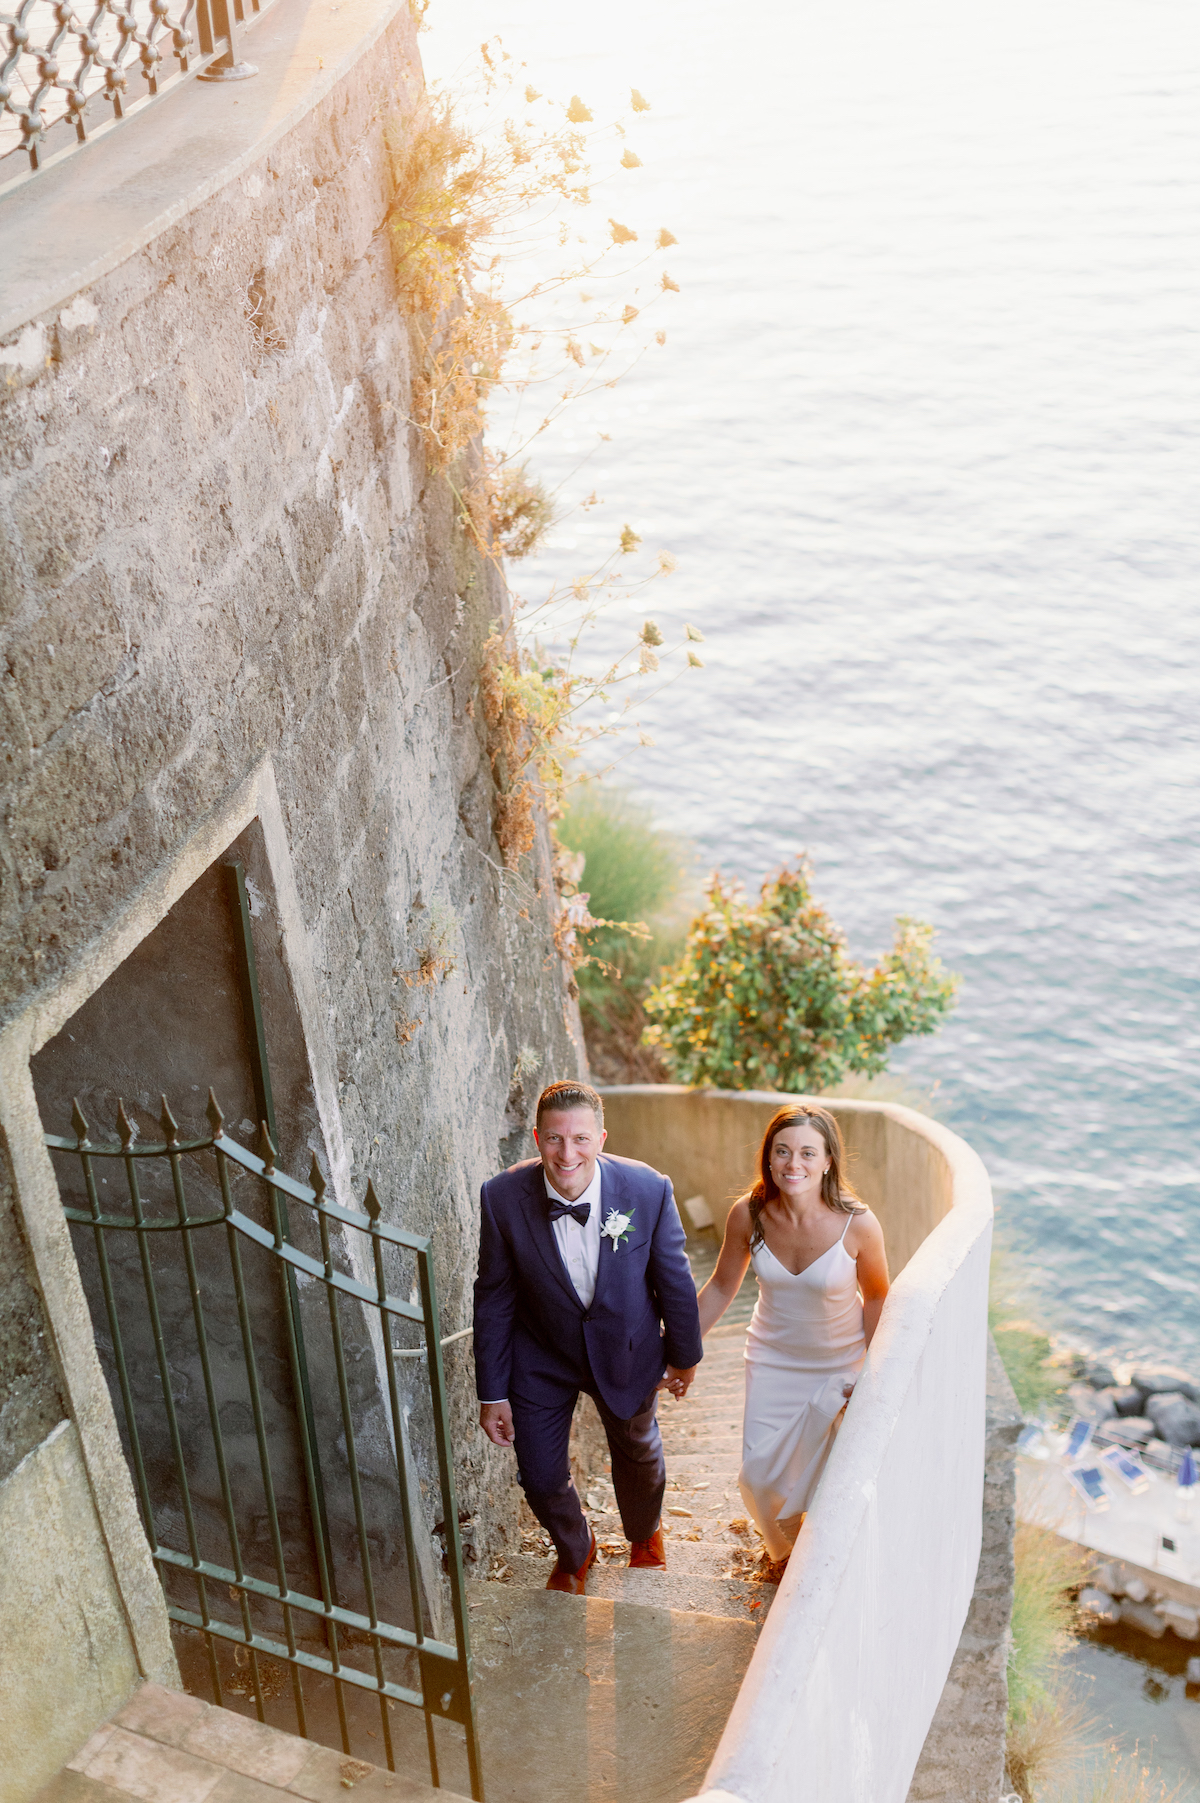 bride and groom beam as they climb side stairs at a lakeside stone building